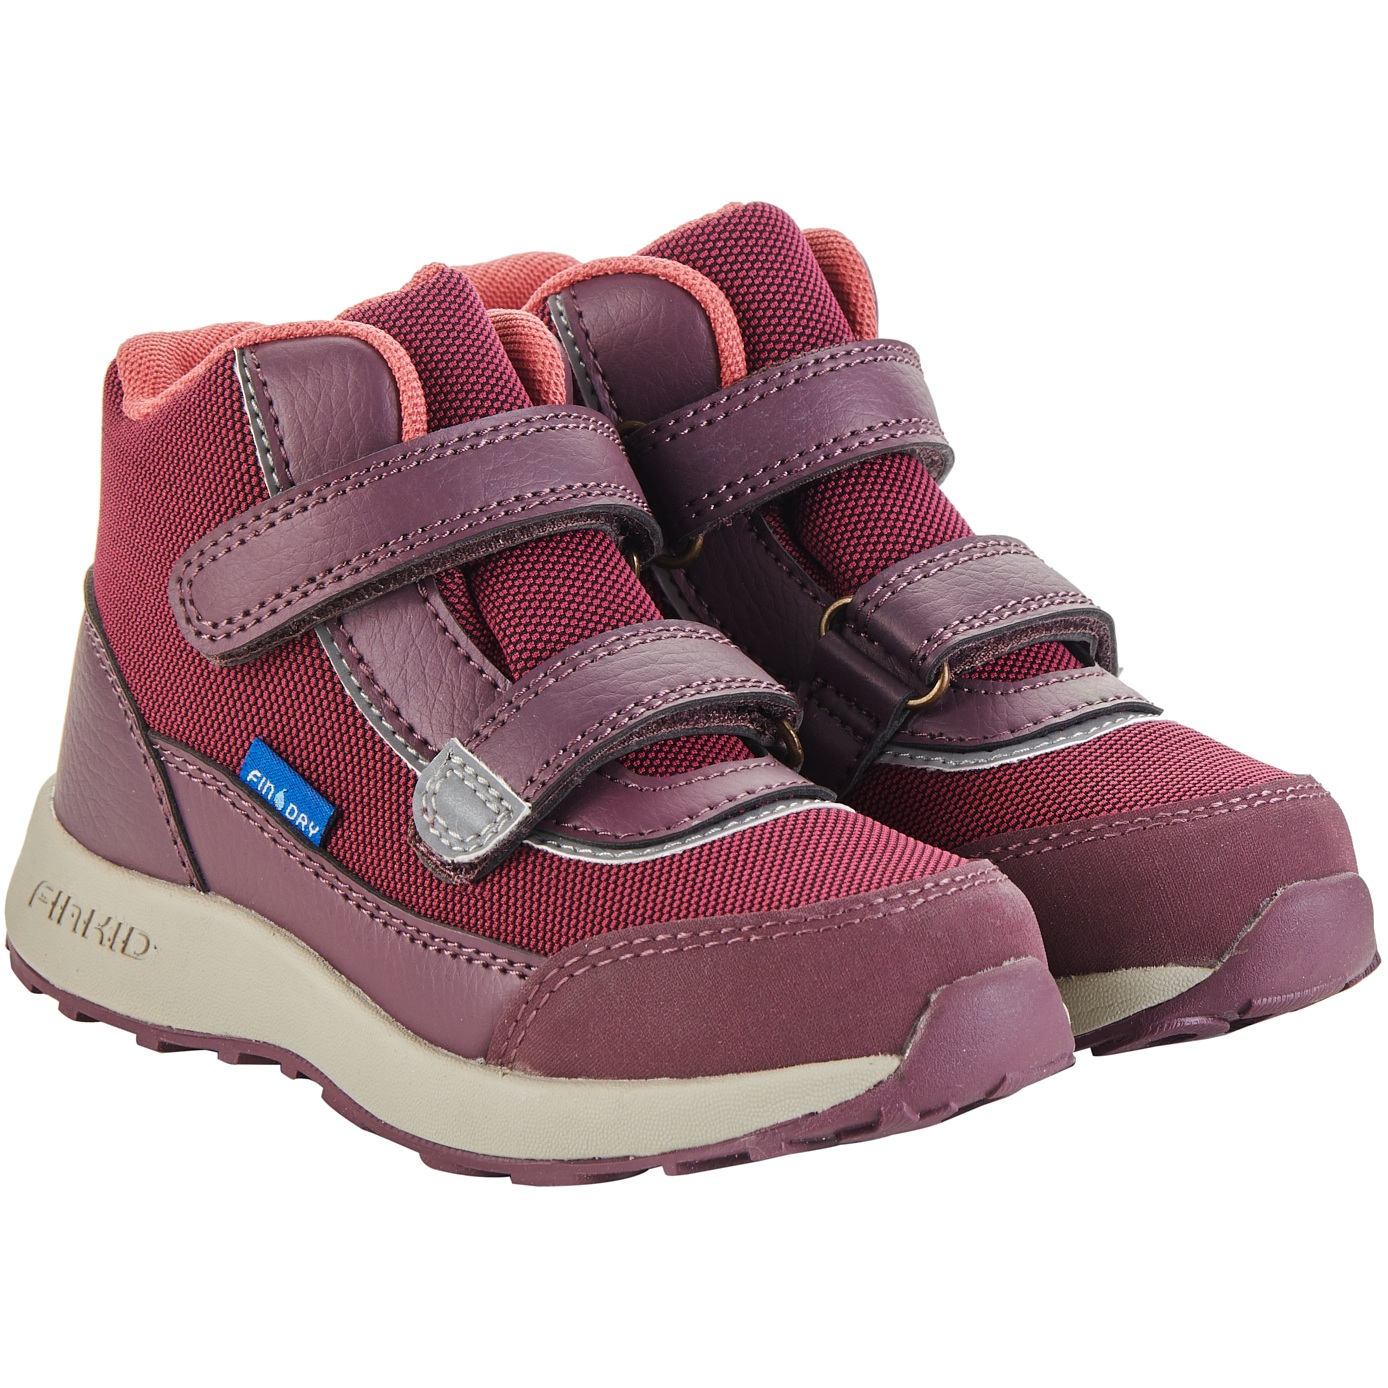 Picture of Finkid KULKU Kids Outdoor Shoes - beet red/eggplant